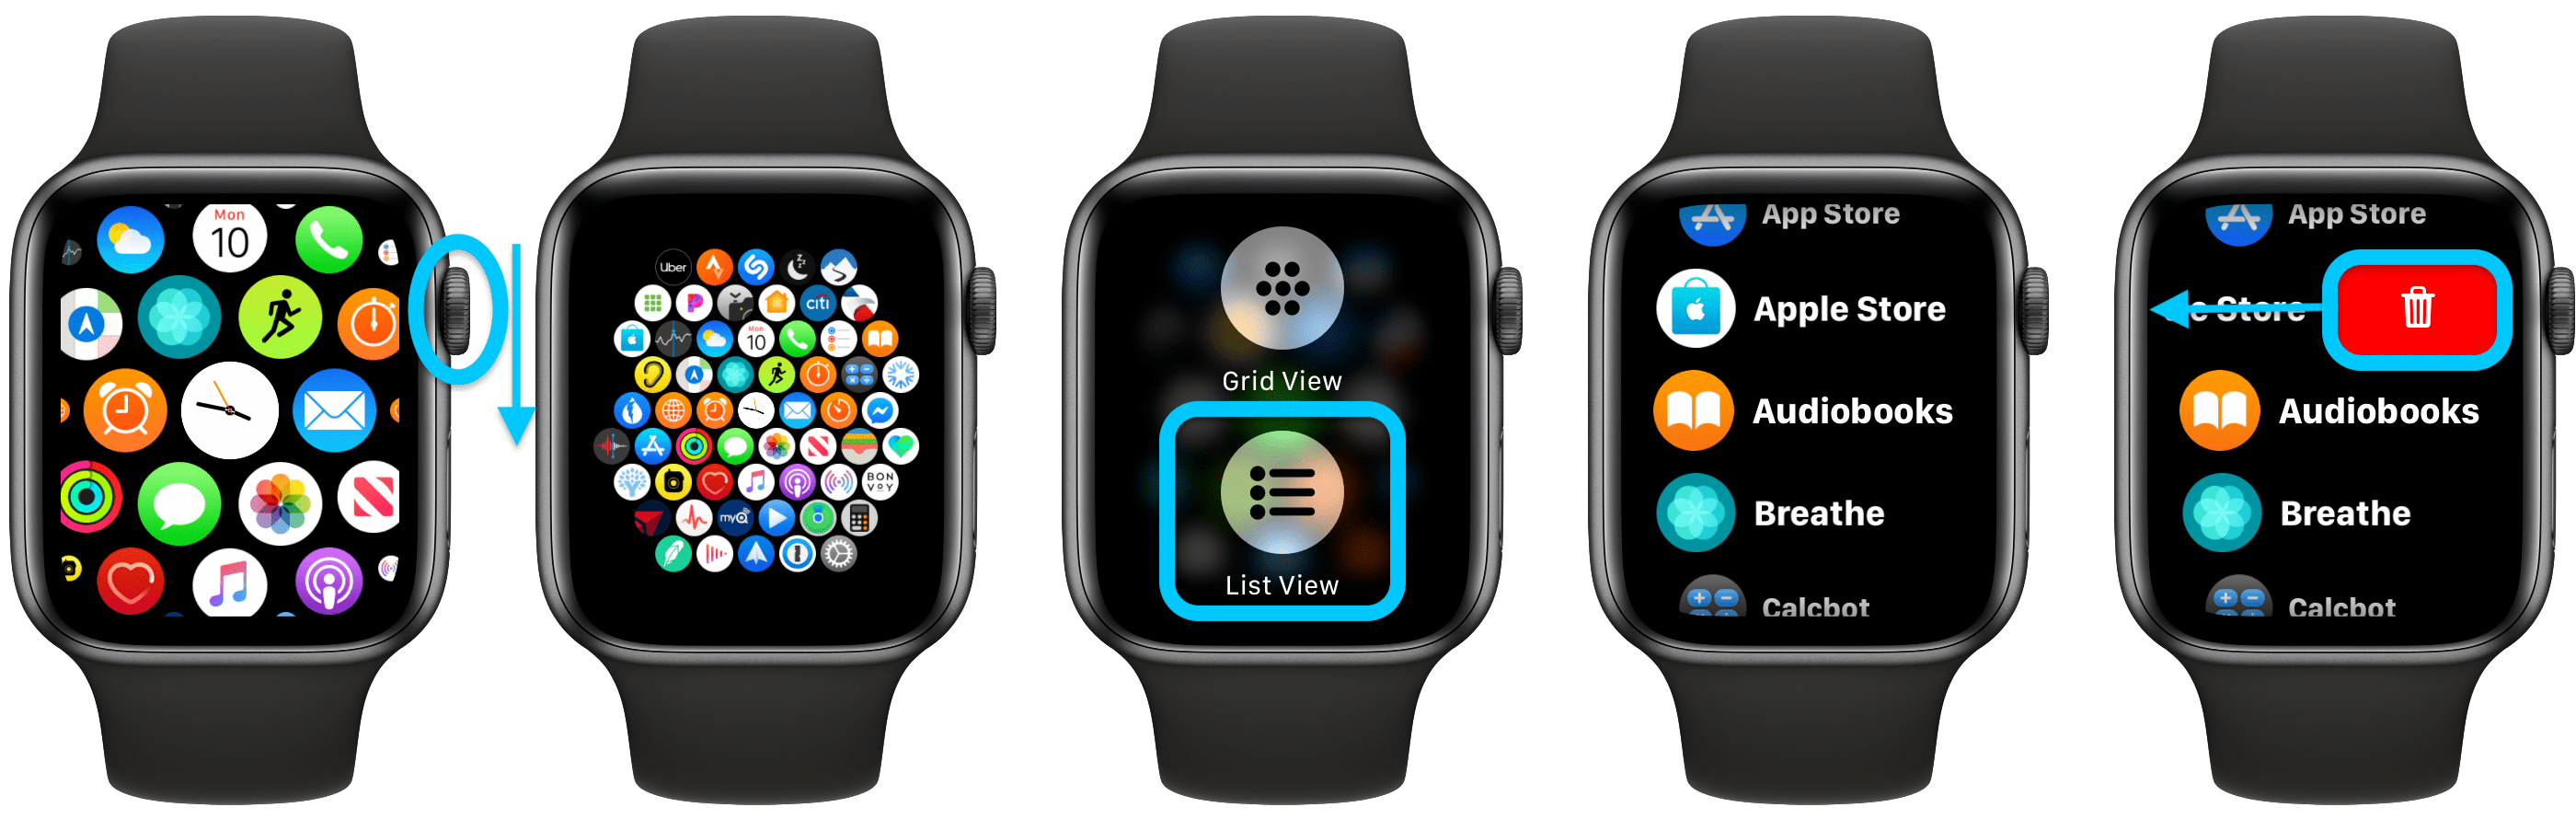 How to see all your Apple Watch apps, including alphabetically - 9to5Mac